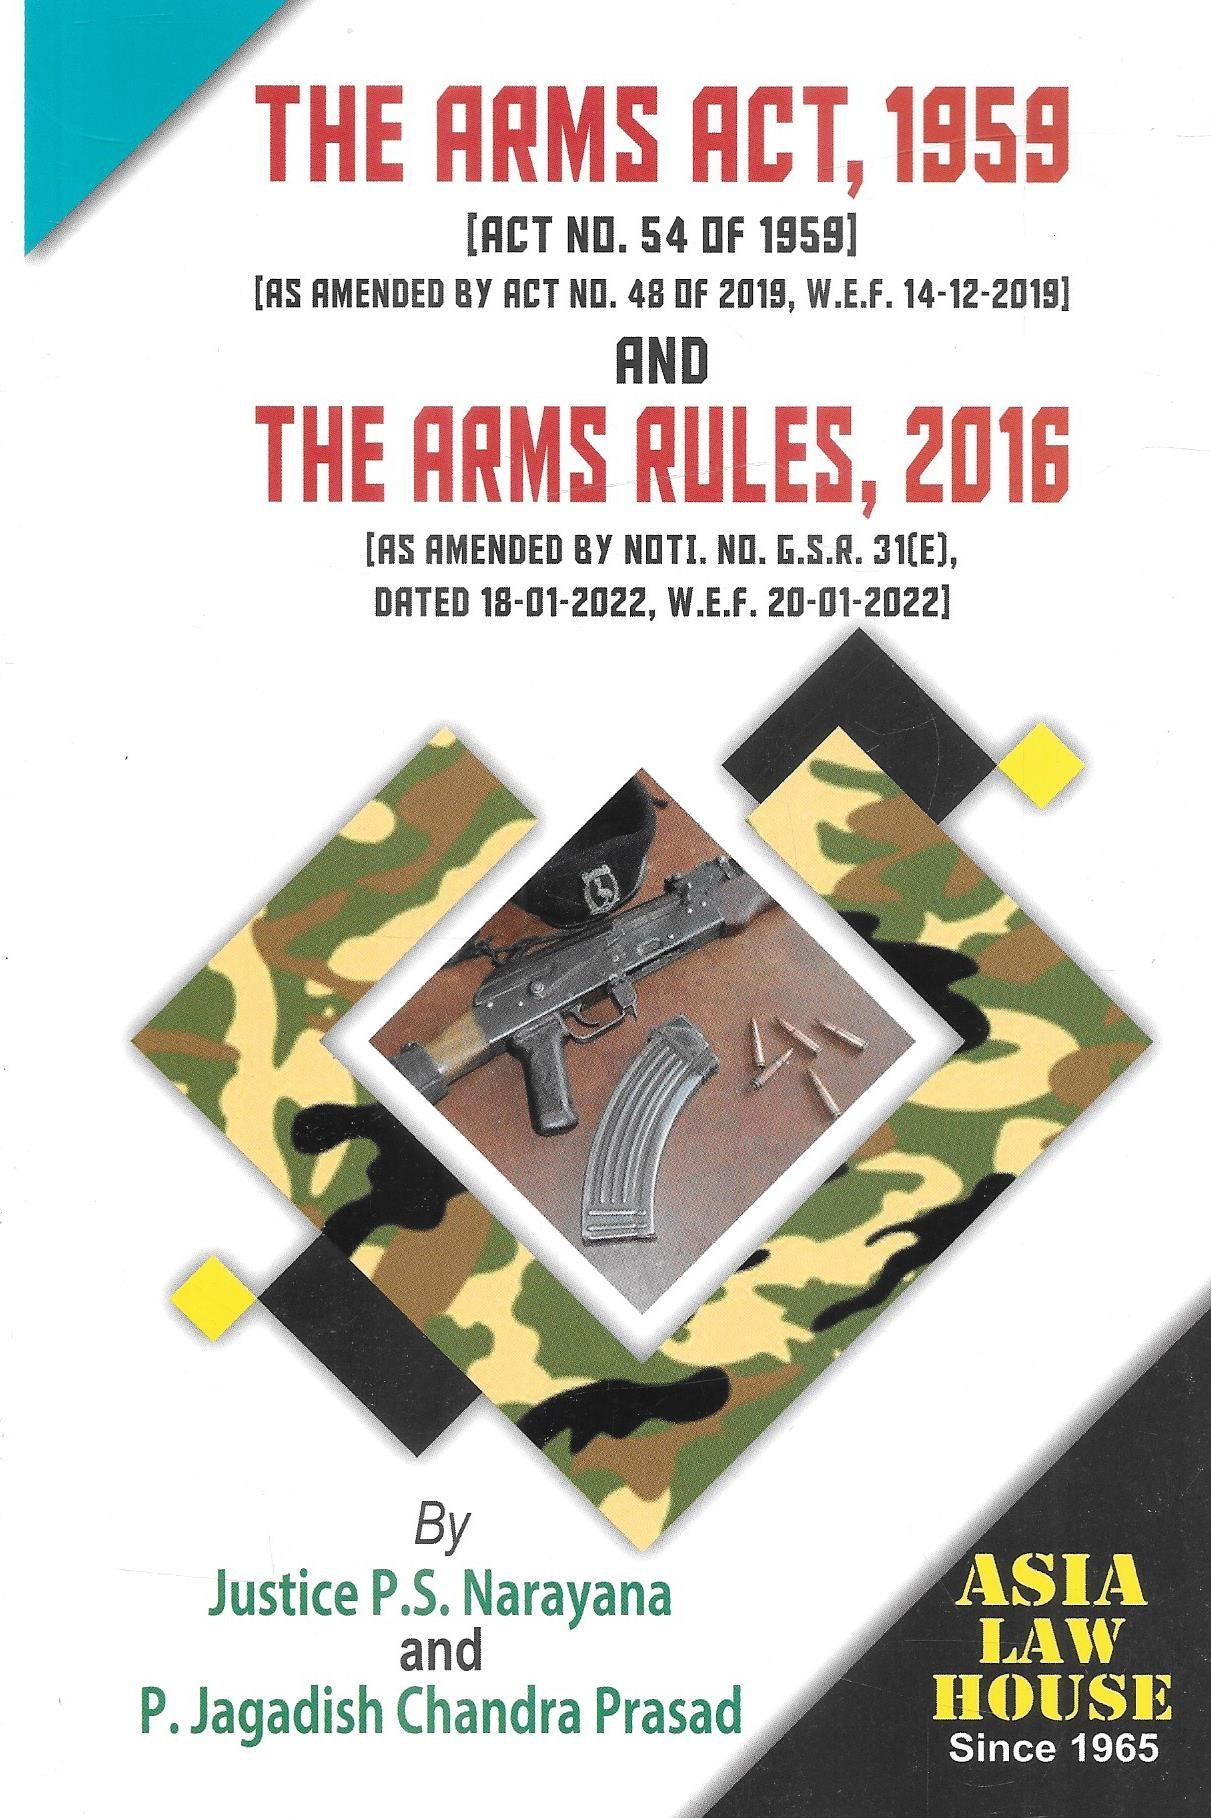 The Arms Act, 1989 with Rules 2016